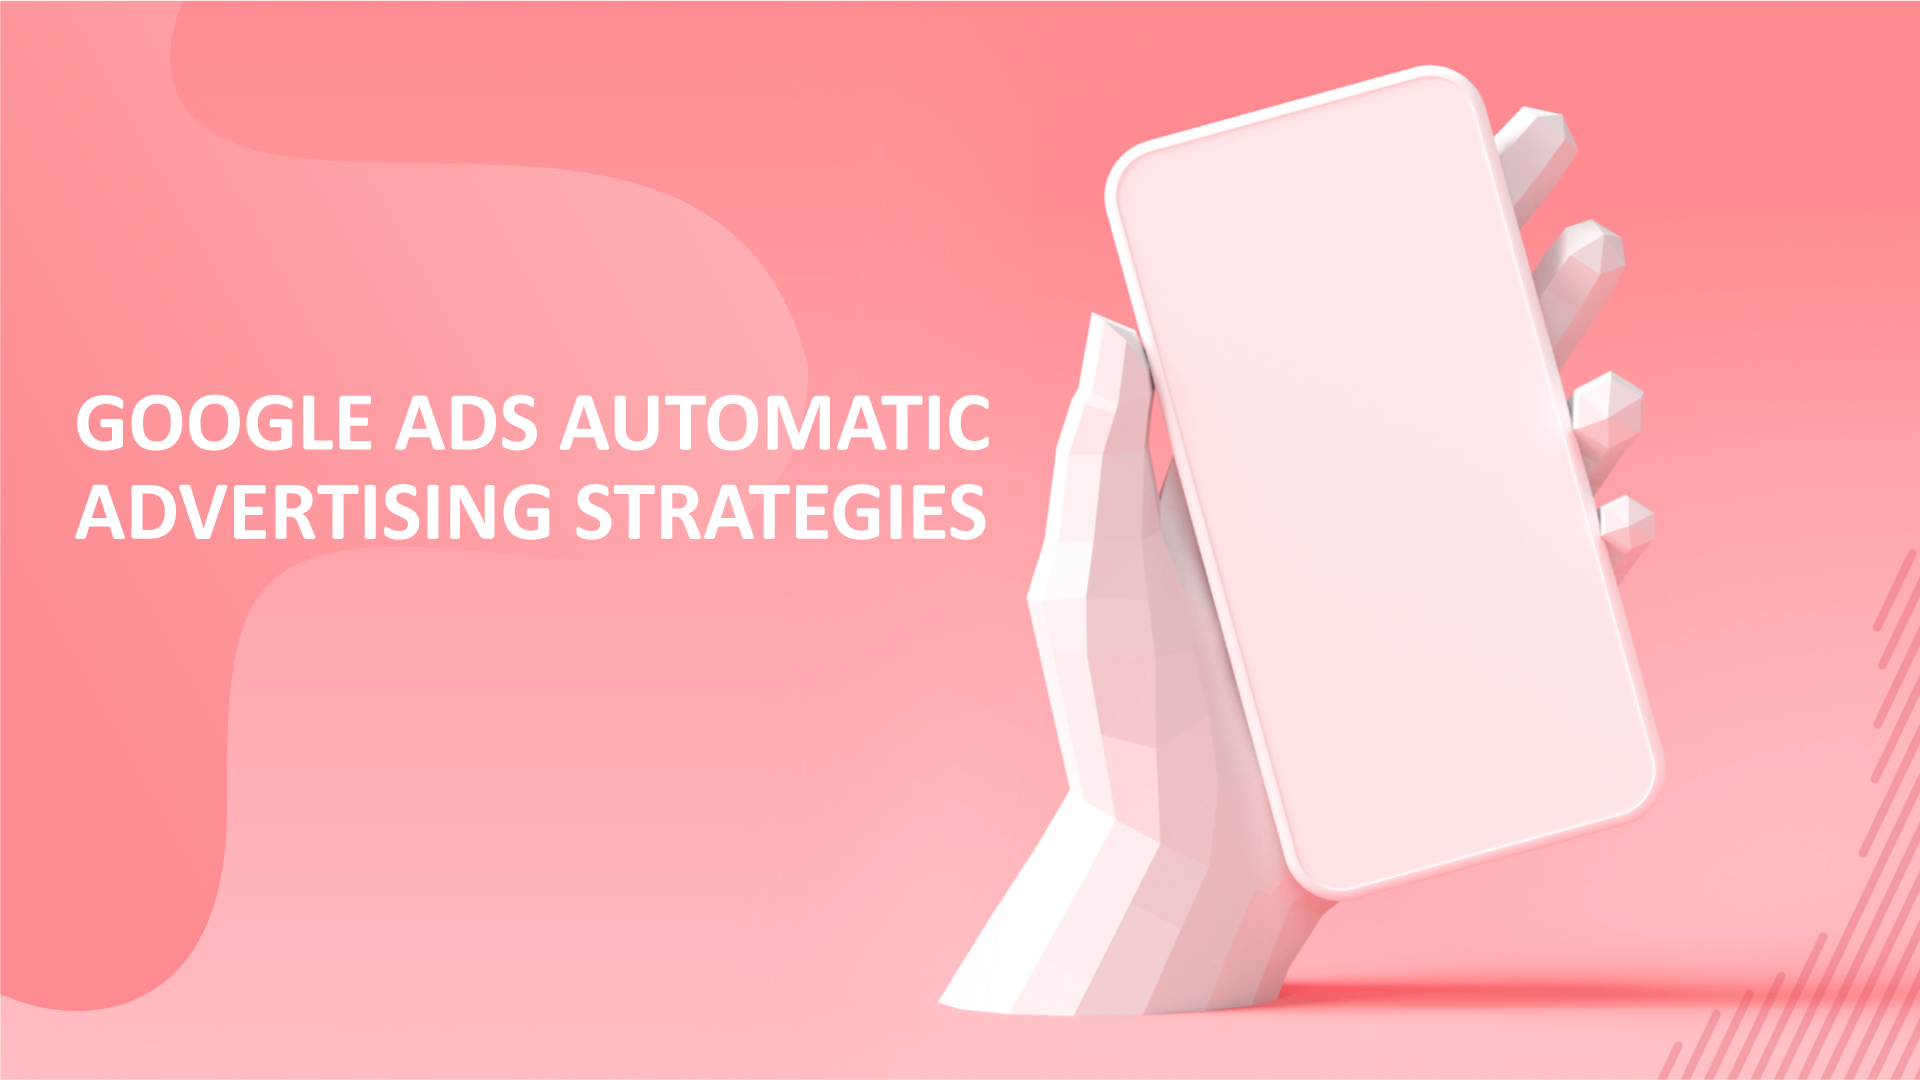 Automated Google Ads advertising strategies